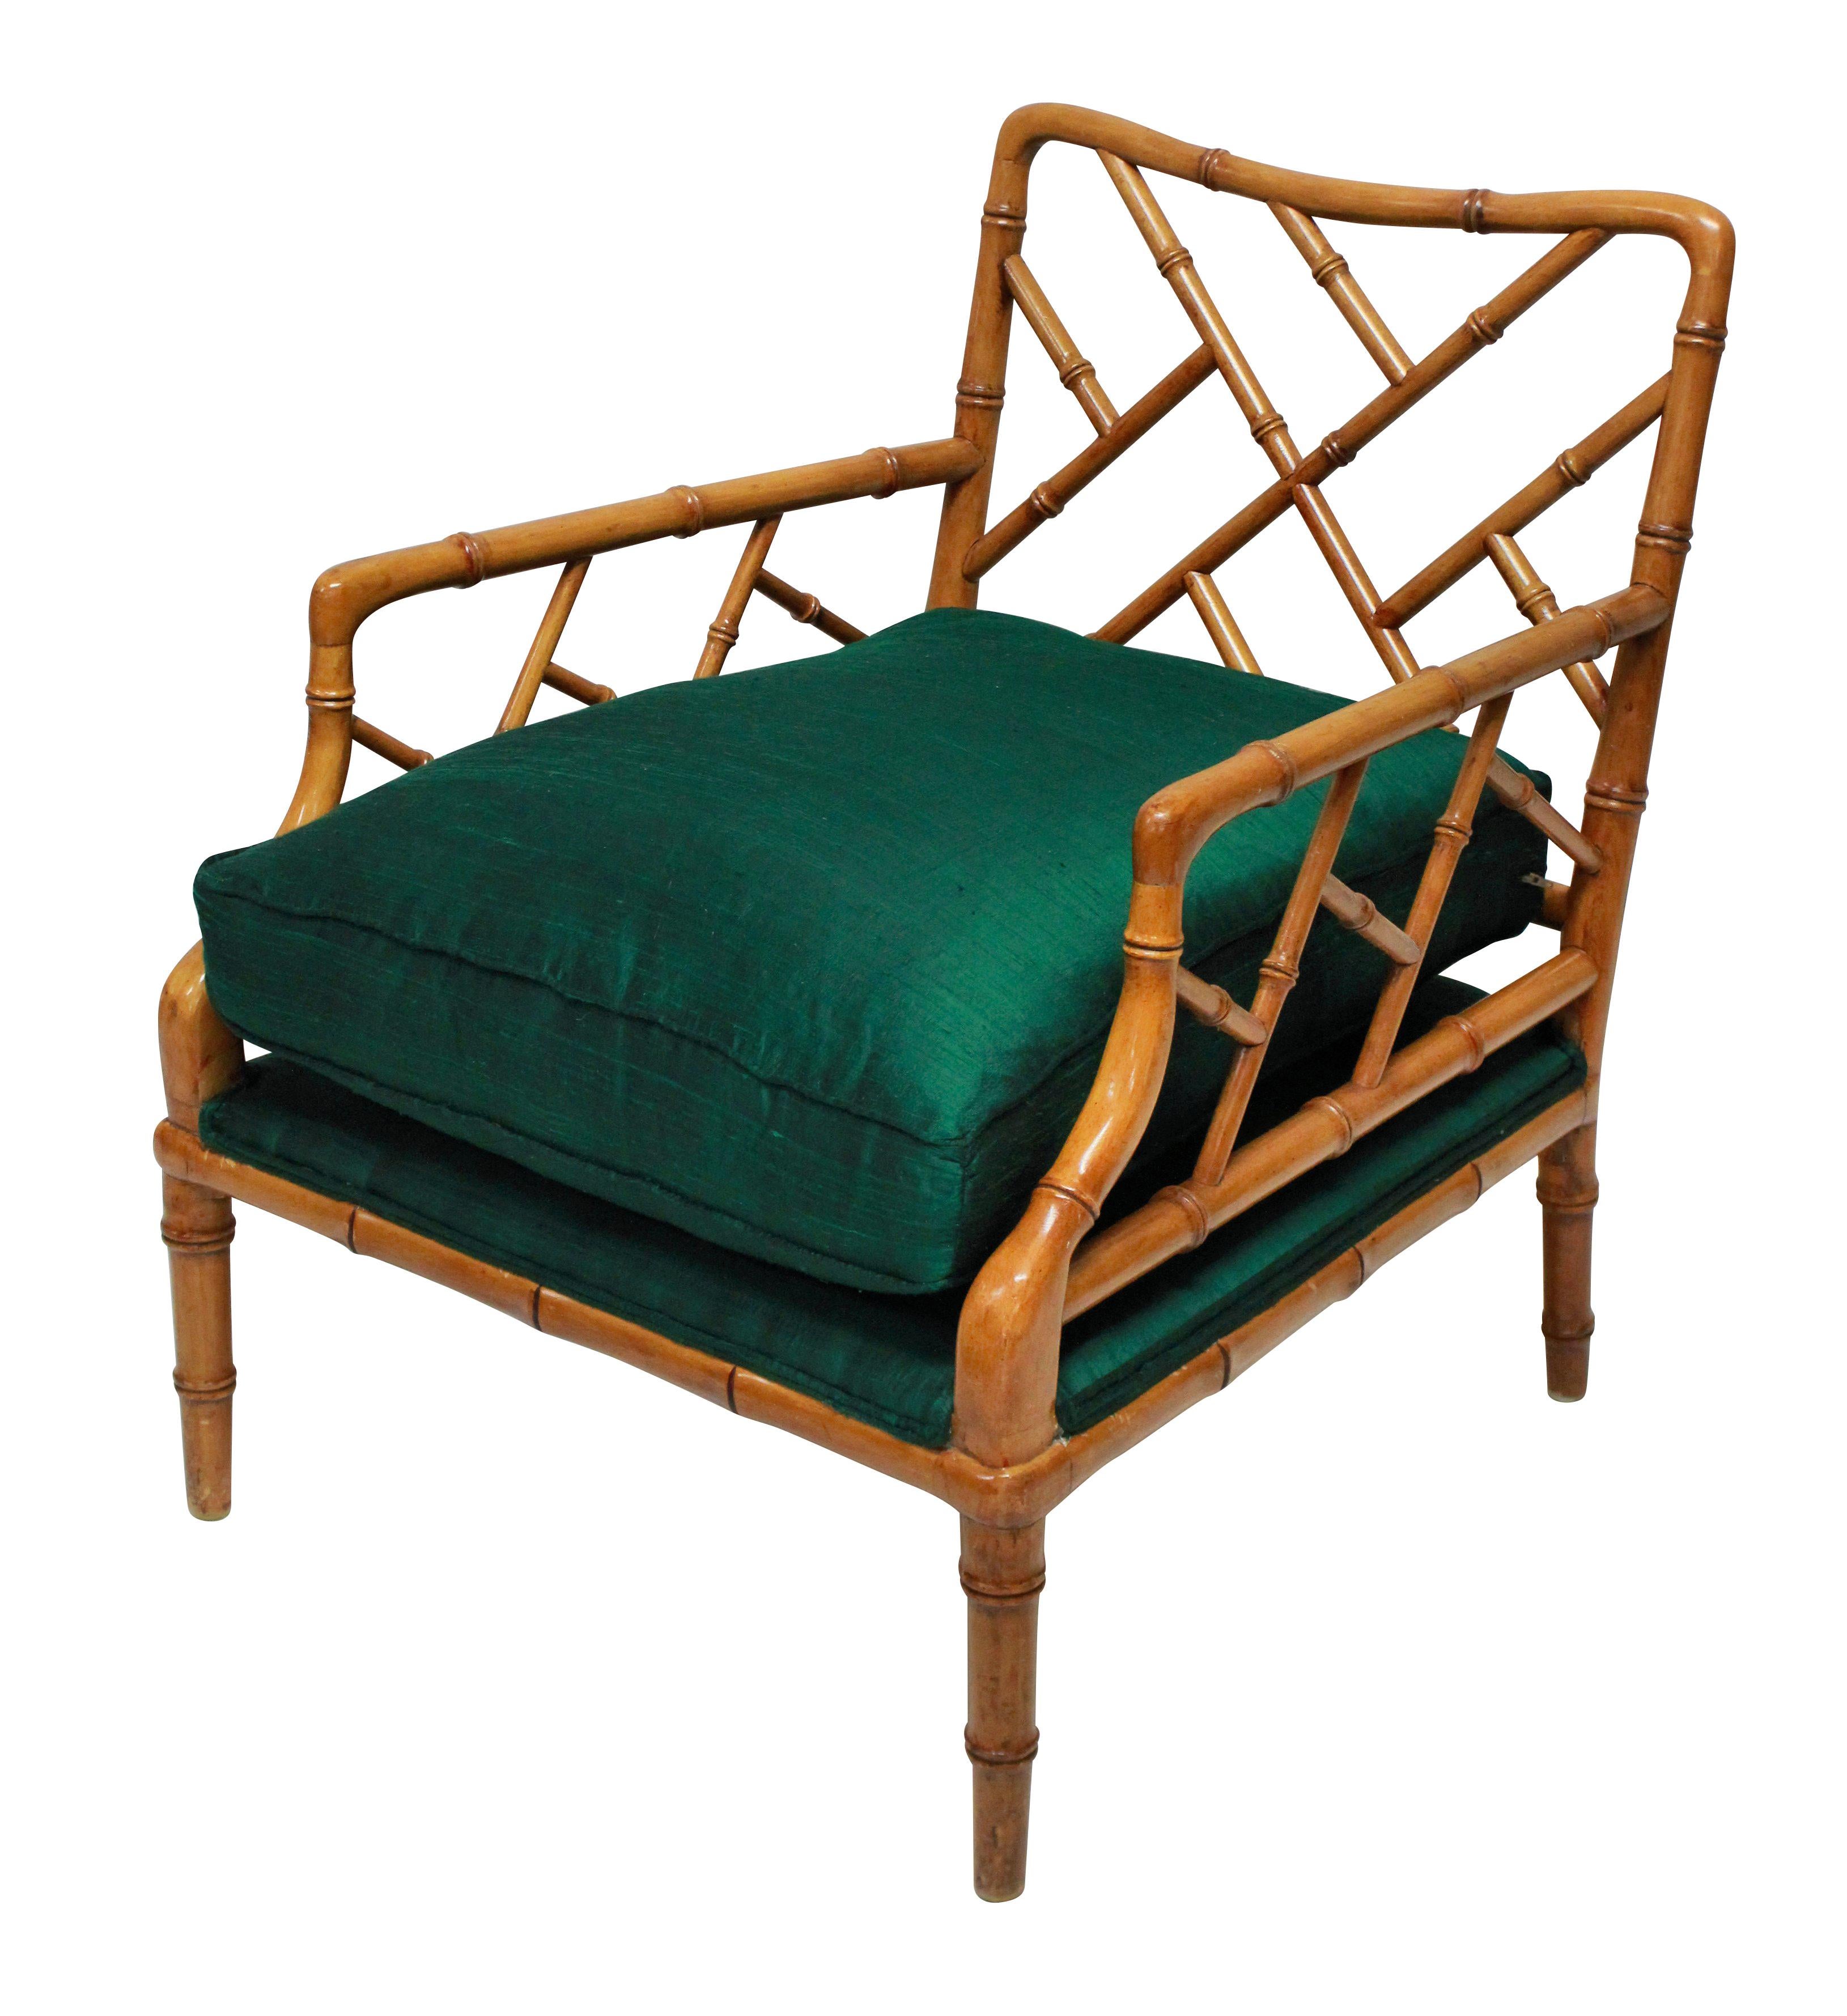 A pair of American faux bamboo cockpen deep armchairs, with newly upholstered emerald green silk seats.

